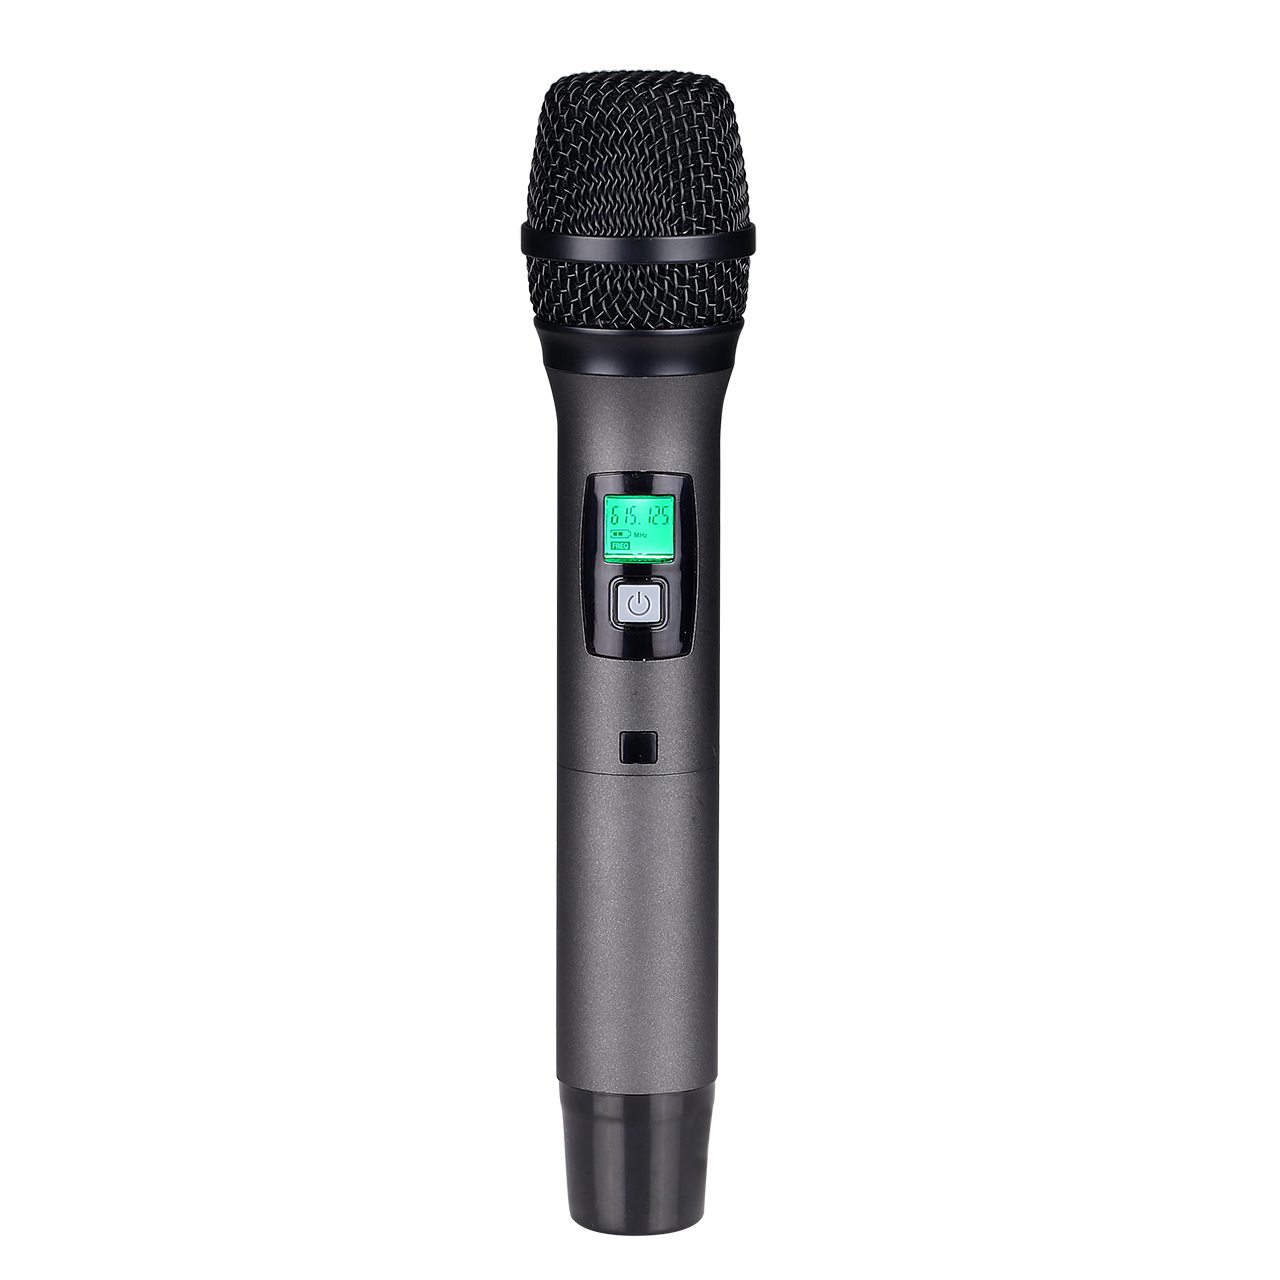 Wireless Microphone for Stage Performance: Enhancing Sound Quality and Mobility